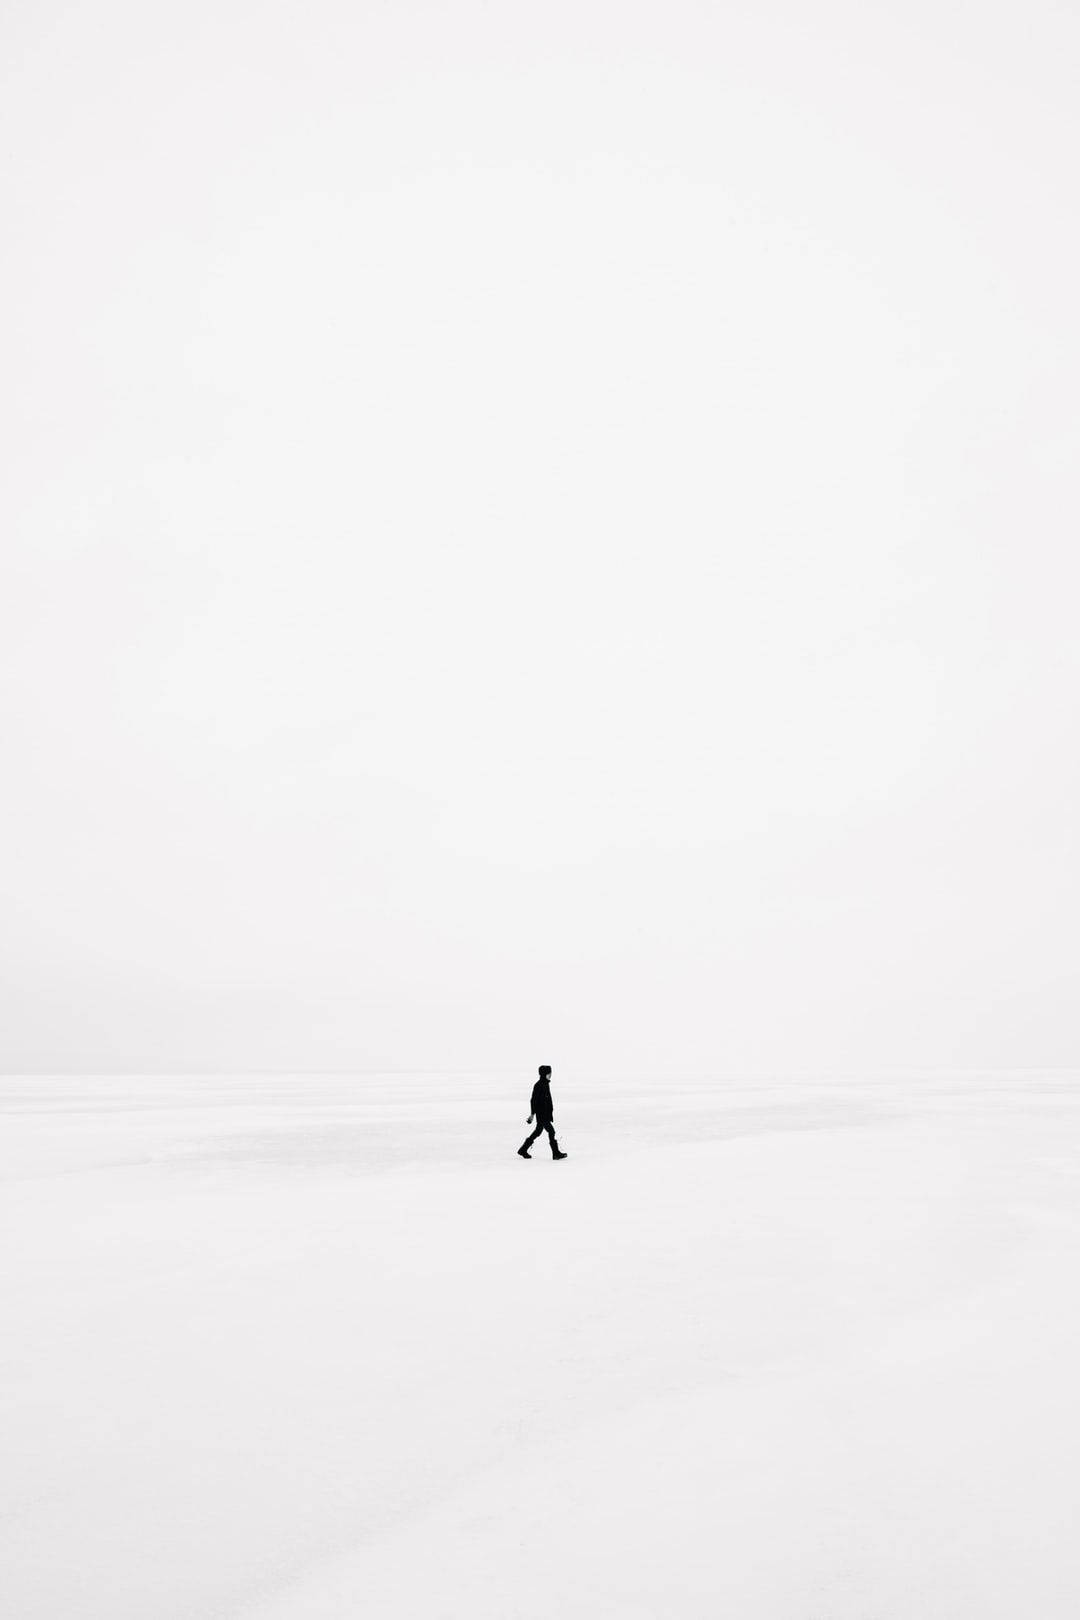 A Simplicity In Motion - Blank White Walking Man Background